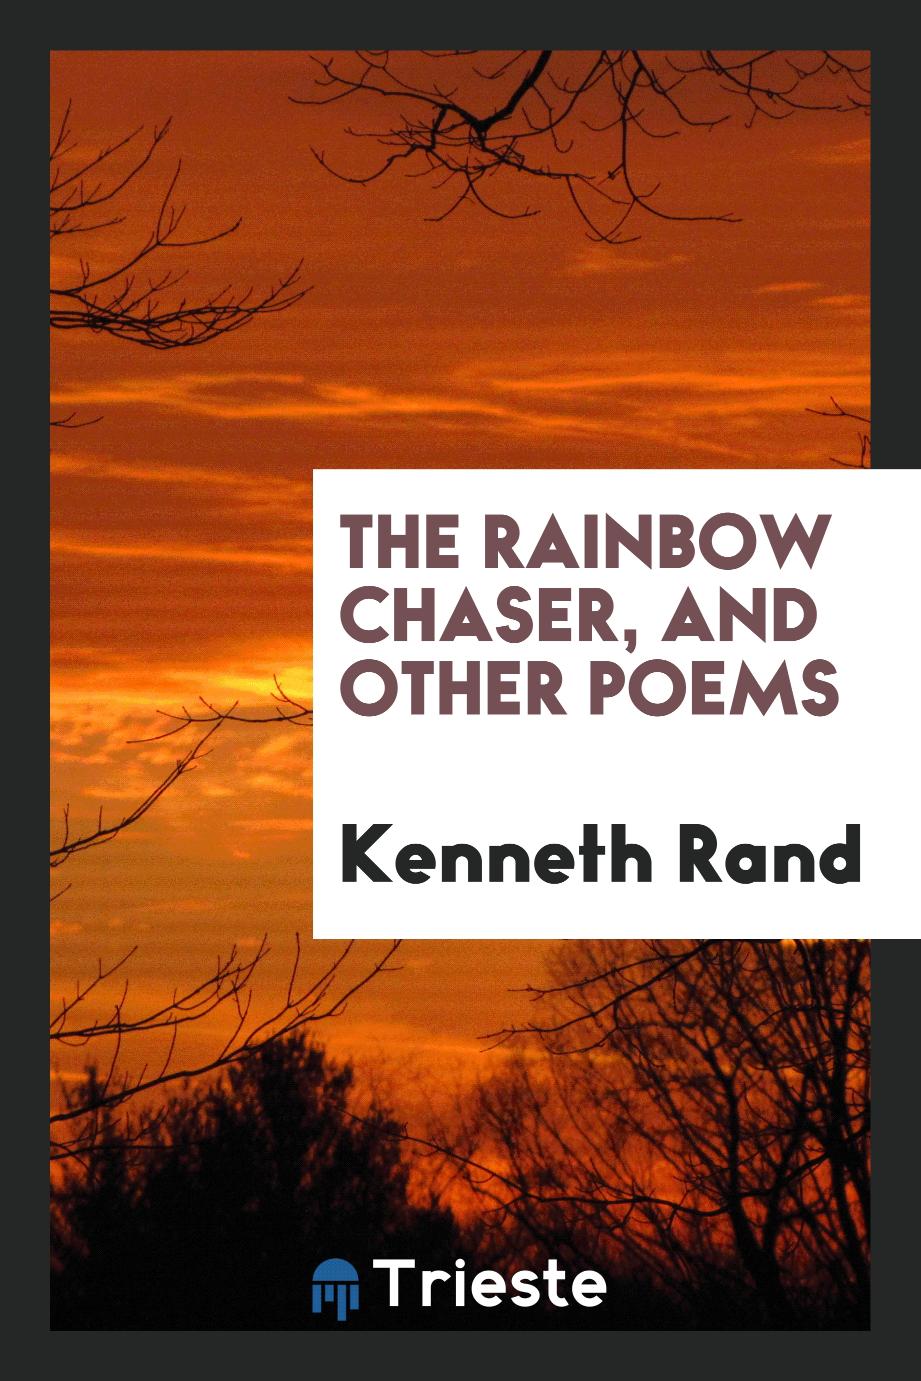 The Rainbow Chaser, and Other Poems